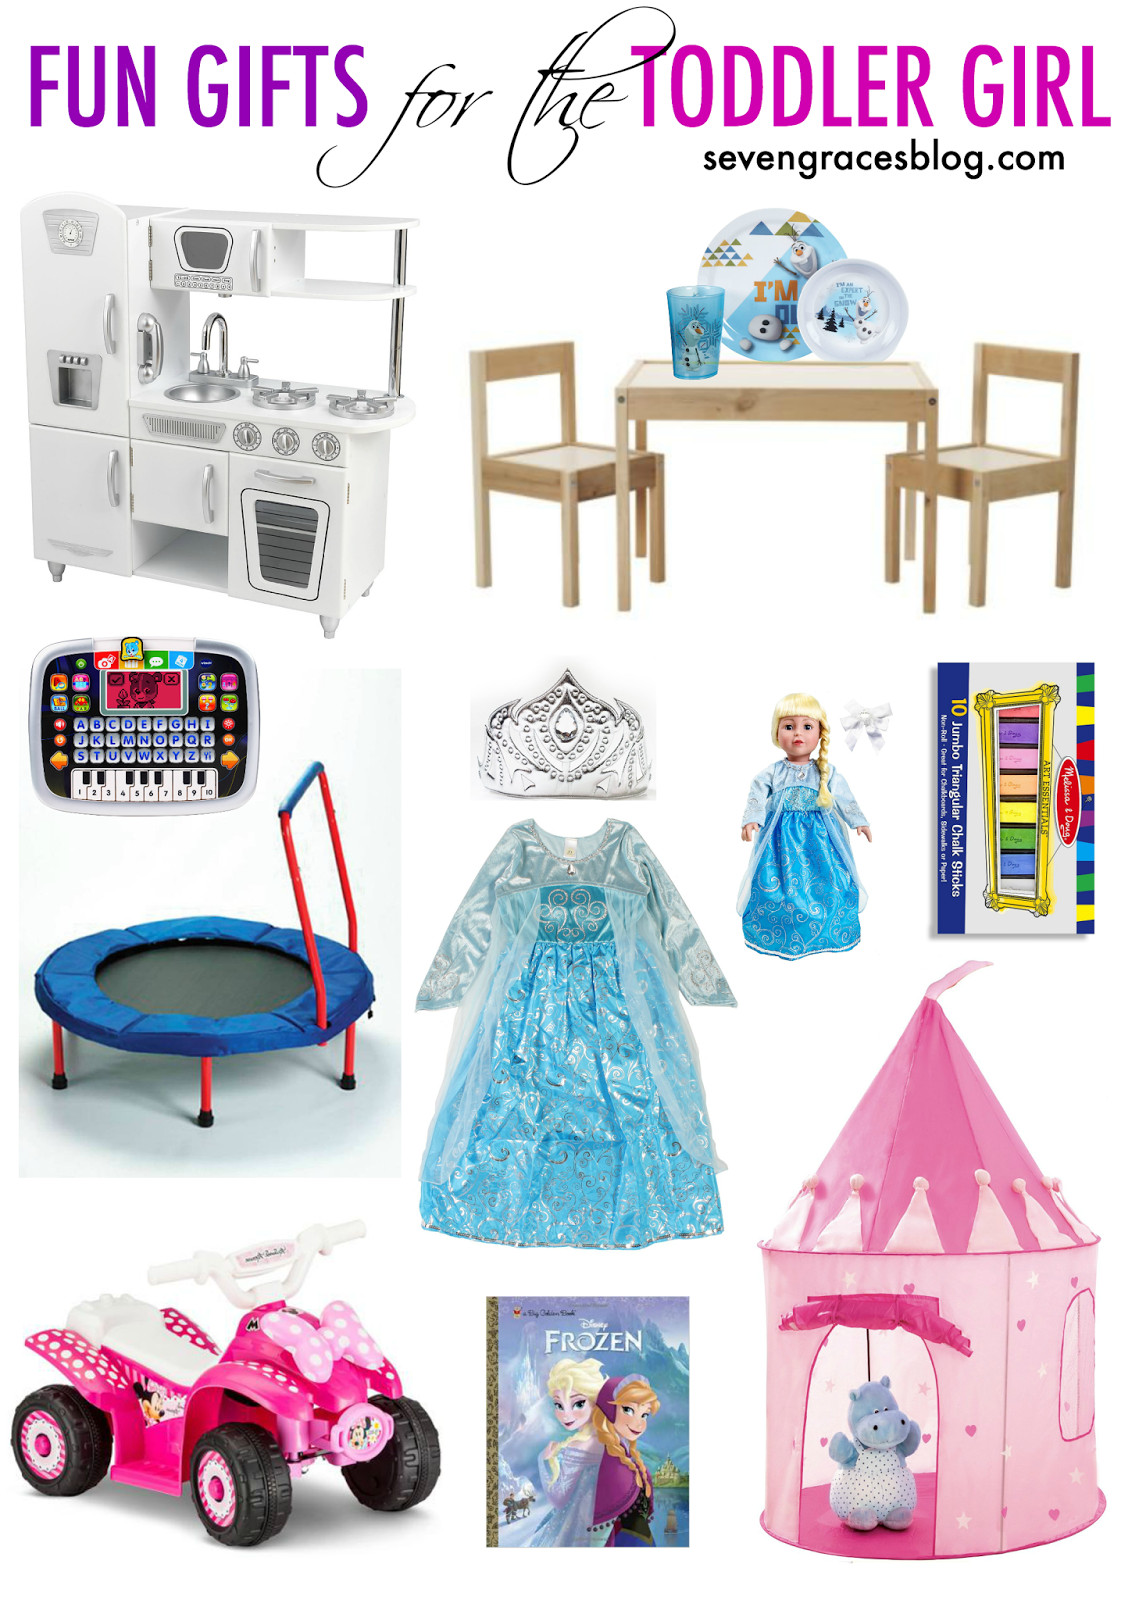 Best ideas about Toddler Girl Birthday Gifts
. Save or Pin Fun Gifts for the Toddler Girl Seven Graces Now.